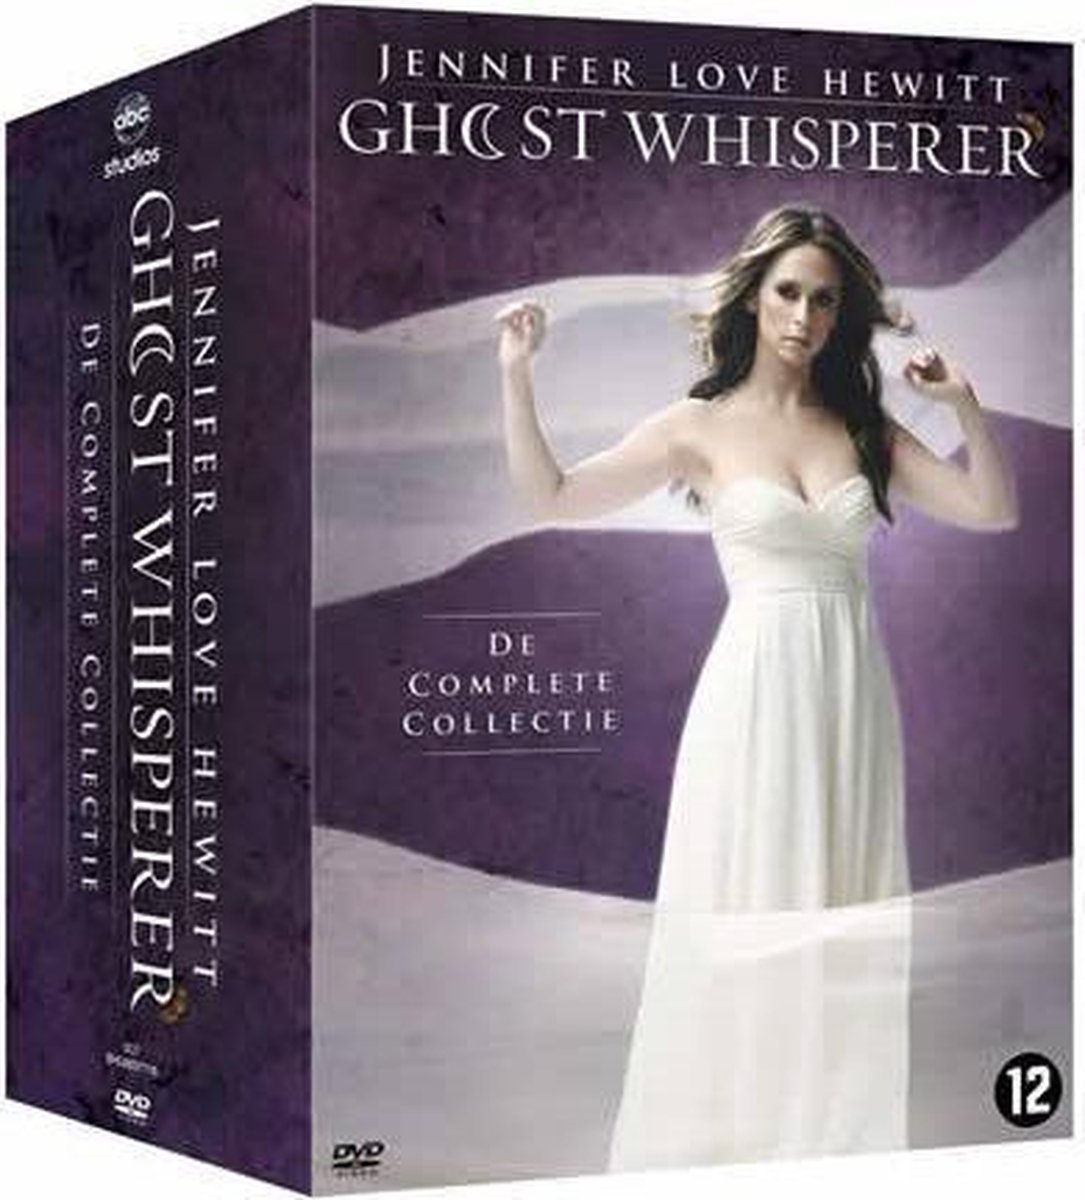 Ghost Whisperer - Complete Collectie - 